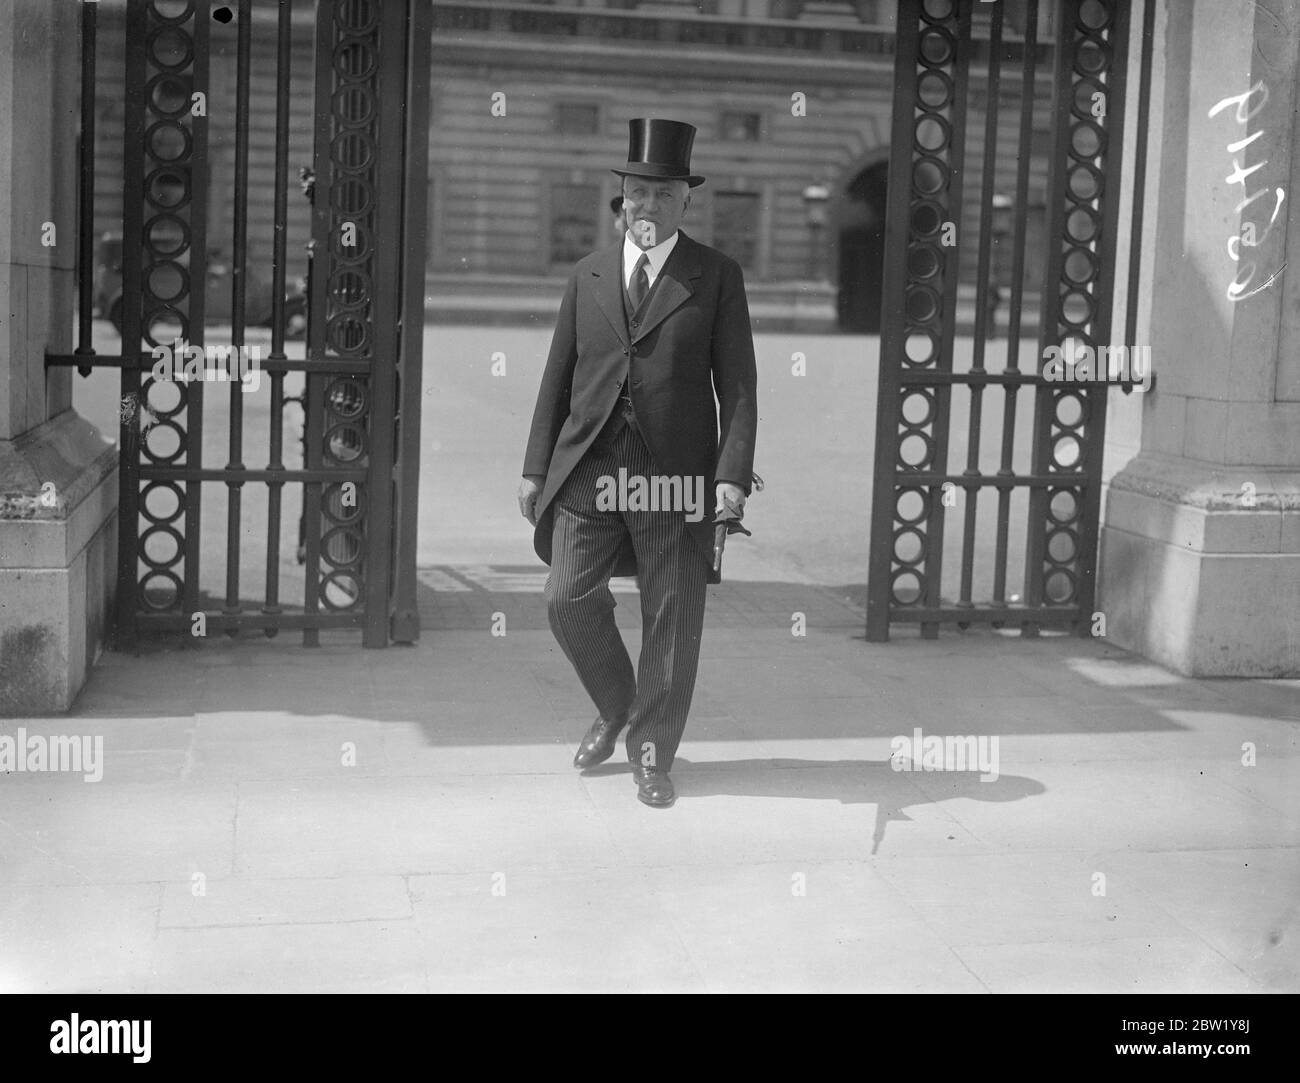 Retiring at Victoria Station Master receives MBE at Investiture. Mr Walter Enves, the retiring Station Master of Victoria receive the MBE when the King held an investiture at Buckingham Palace. Photo shows, Mr Walter Enves, the retiring Victoria Station Master leaving the Palace after receiving the MBE. 11. June 1937 Stock Photo